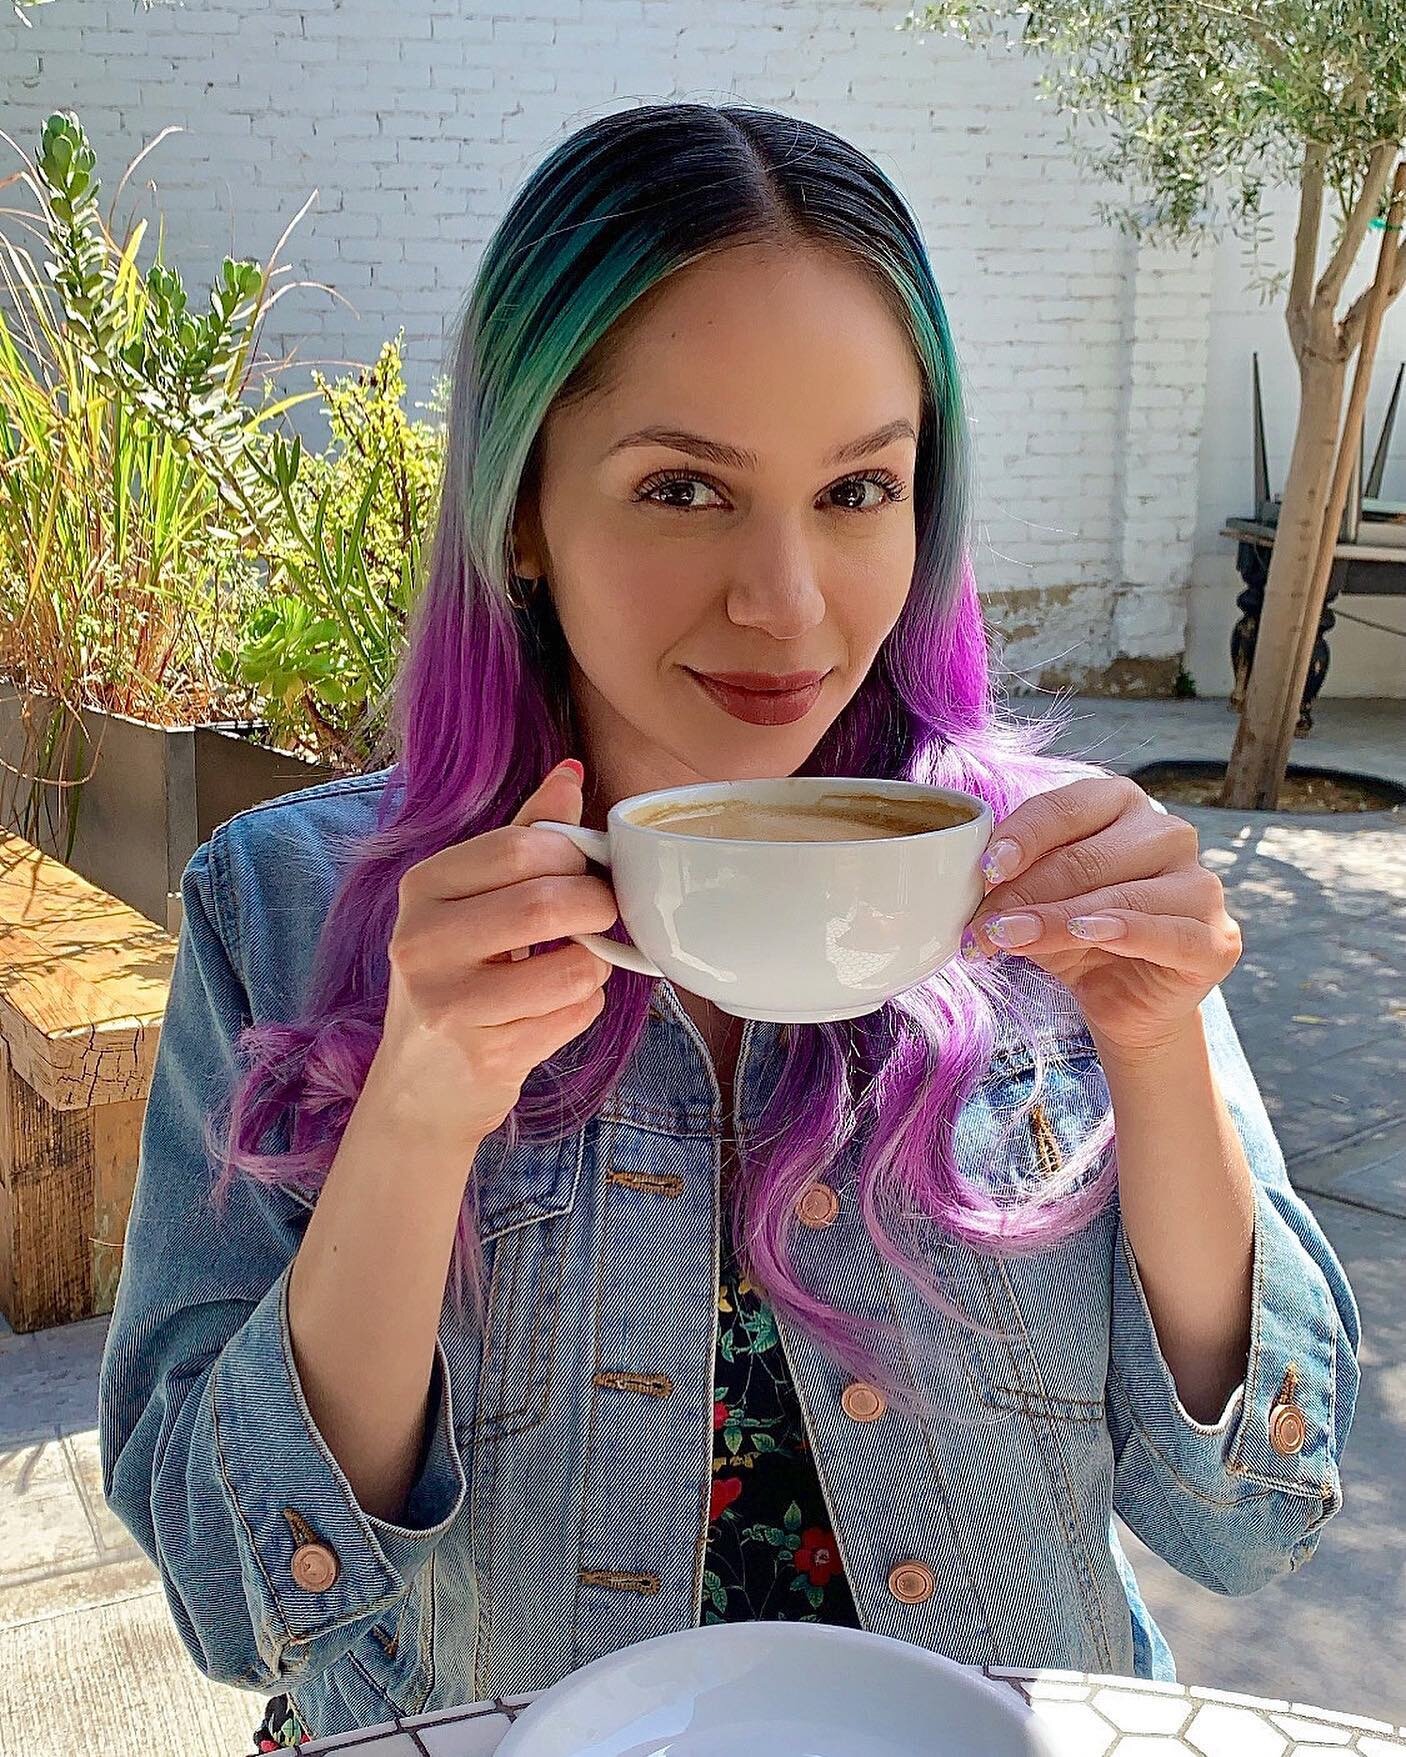 Lately, I&rsquo;ve been trying out new caf&eacute;s ☕️ as a way to ease back into socializing after living like a hermit in LA during the last year. If you have any fav spots in the city, drop them below👇

Thanks in advance 💜#cafehopping